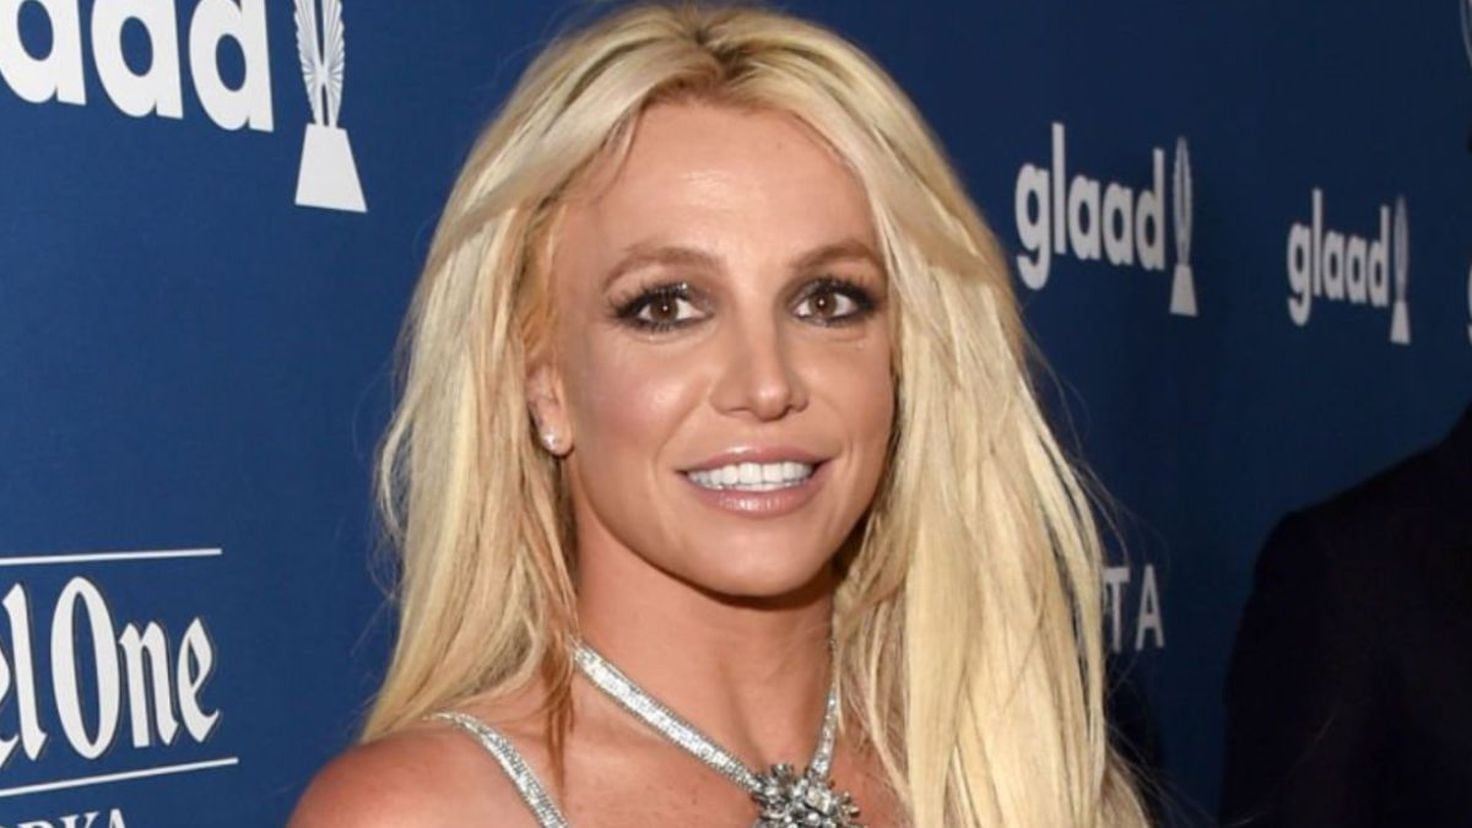 The alarming state of health of Britney Spears: she does not see her children, lives in isolation and sleeps excessively